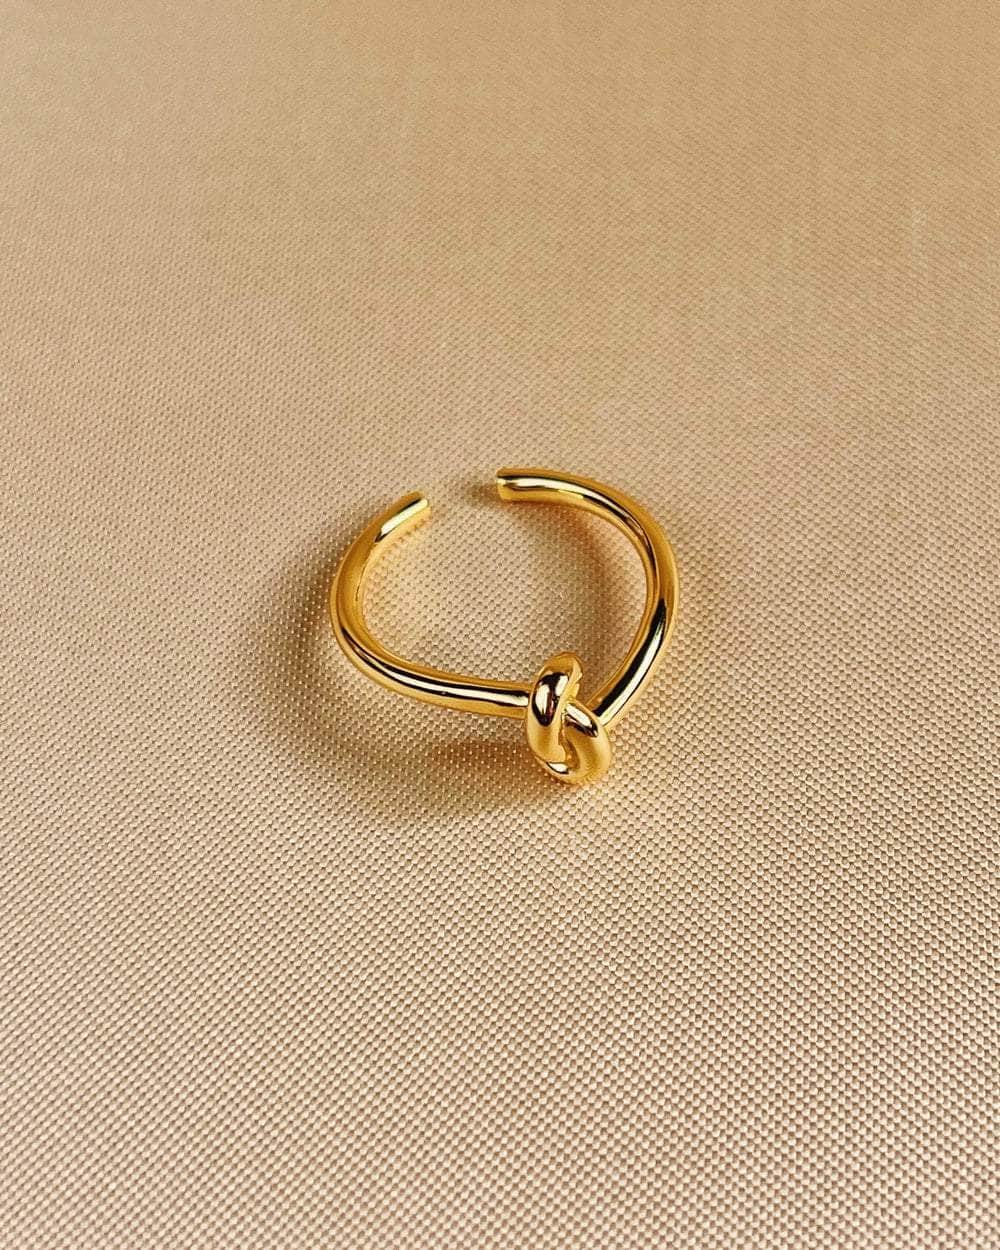 So Dainty Co. Rings Emilia Gold Ring Gold Plated 925 Sterling Silver Jewelry